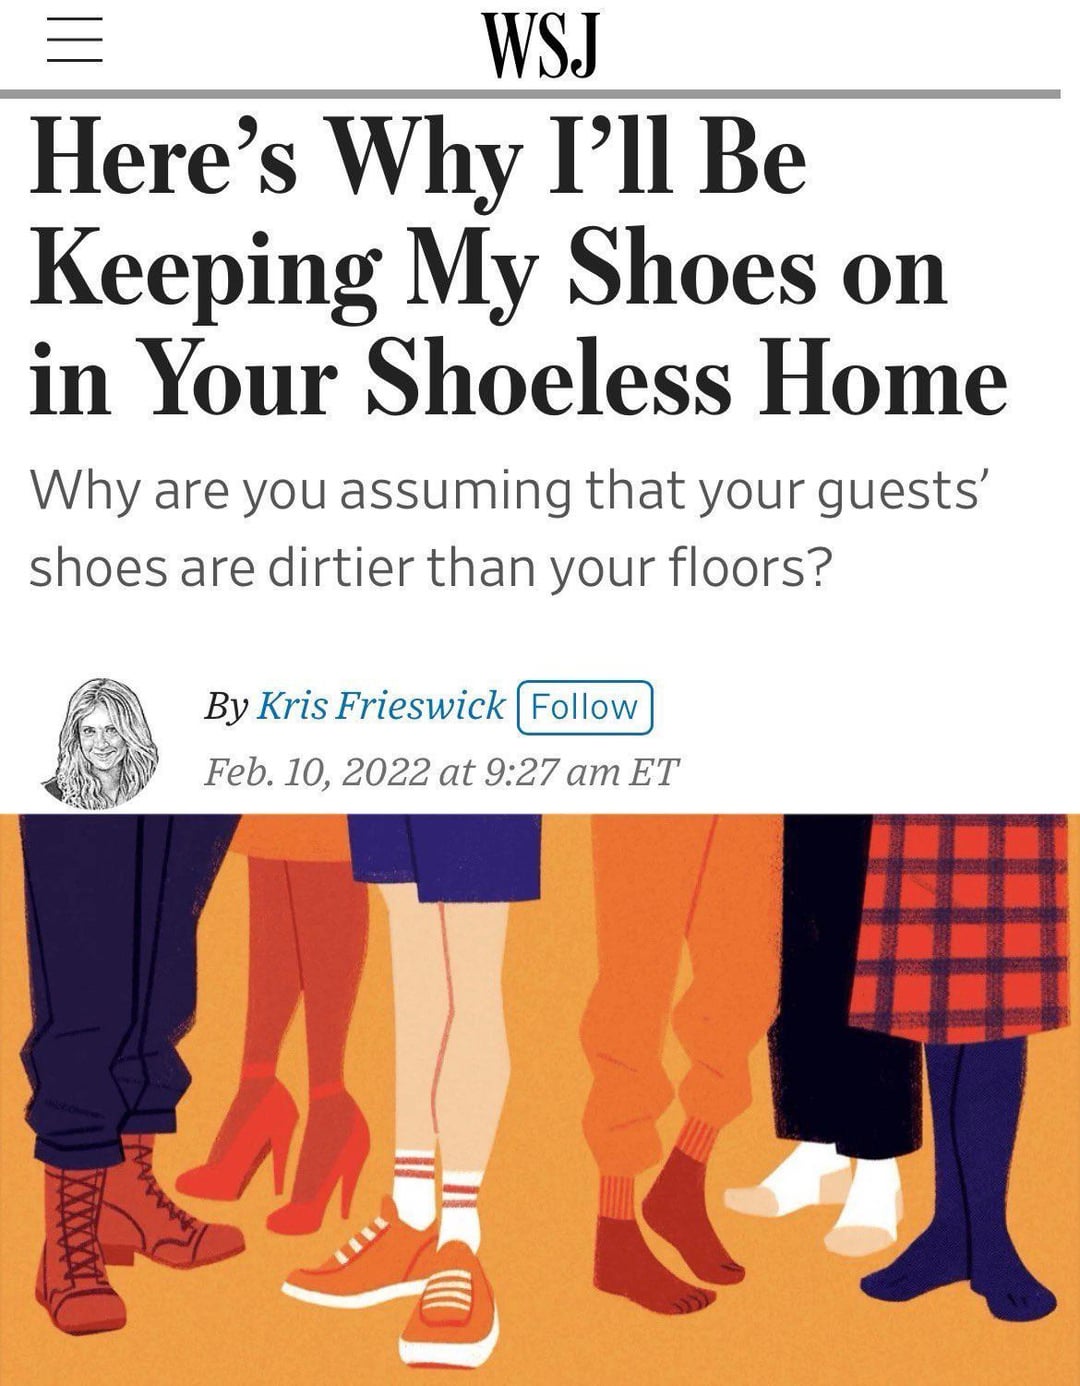 == WSJ Here's Why I'll Be Keeping My Shoes on in Your Shoeless Home Why are you assuming that your guests' shoes are dirtier than your floors? By Kris Frieswick Follow Feb. 10, 2022 at 9:27 am ET www